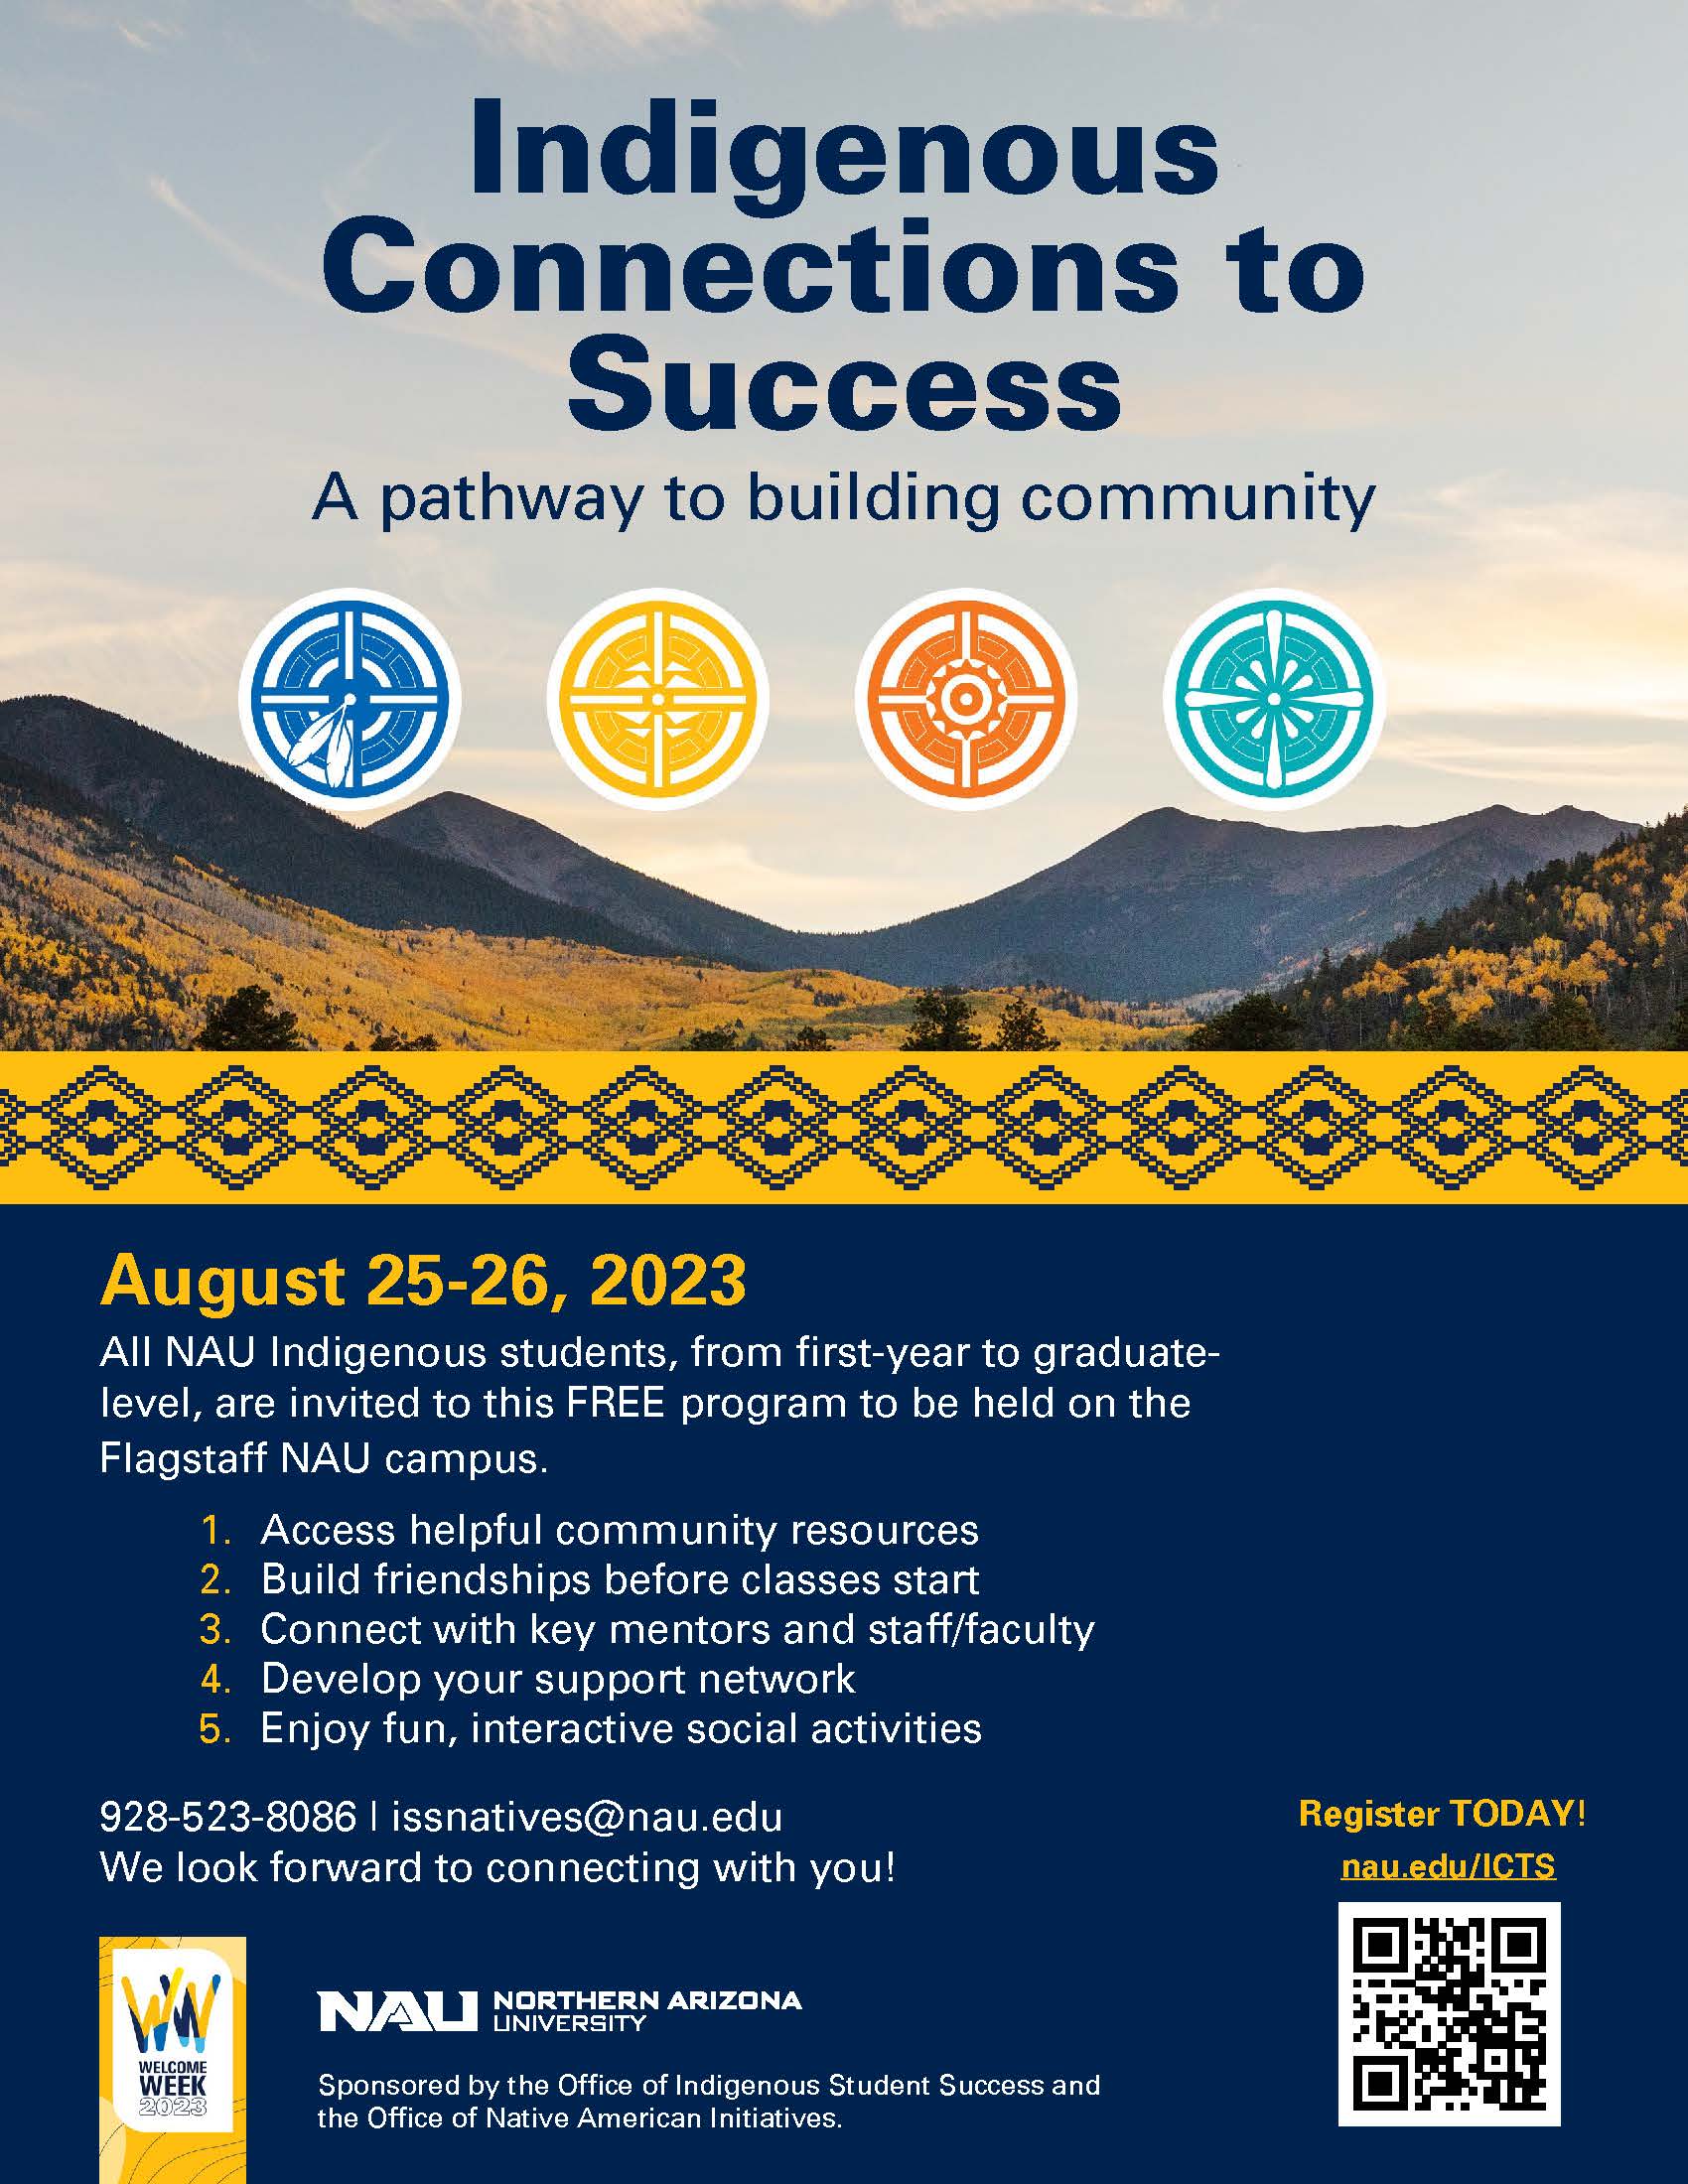 Indigenous Connections to Success flyer 85x11 8-7-23.jpg